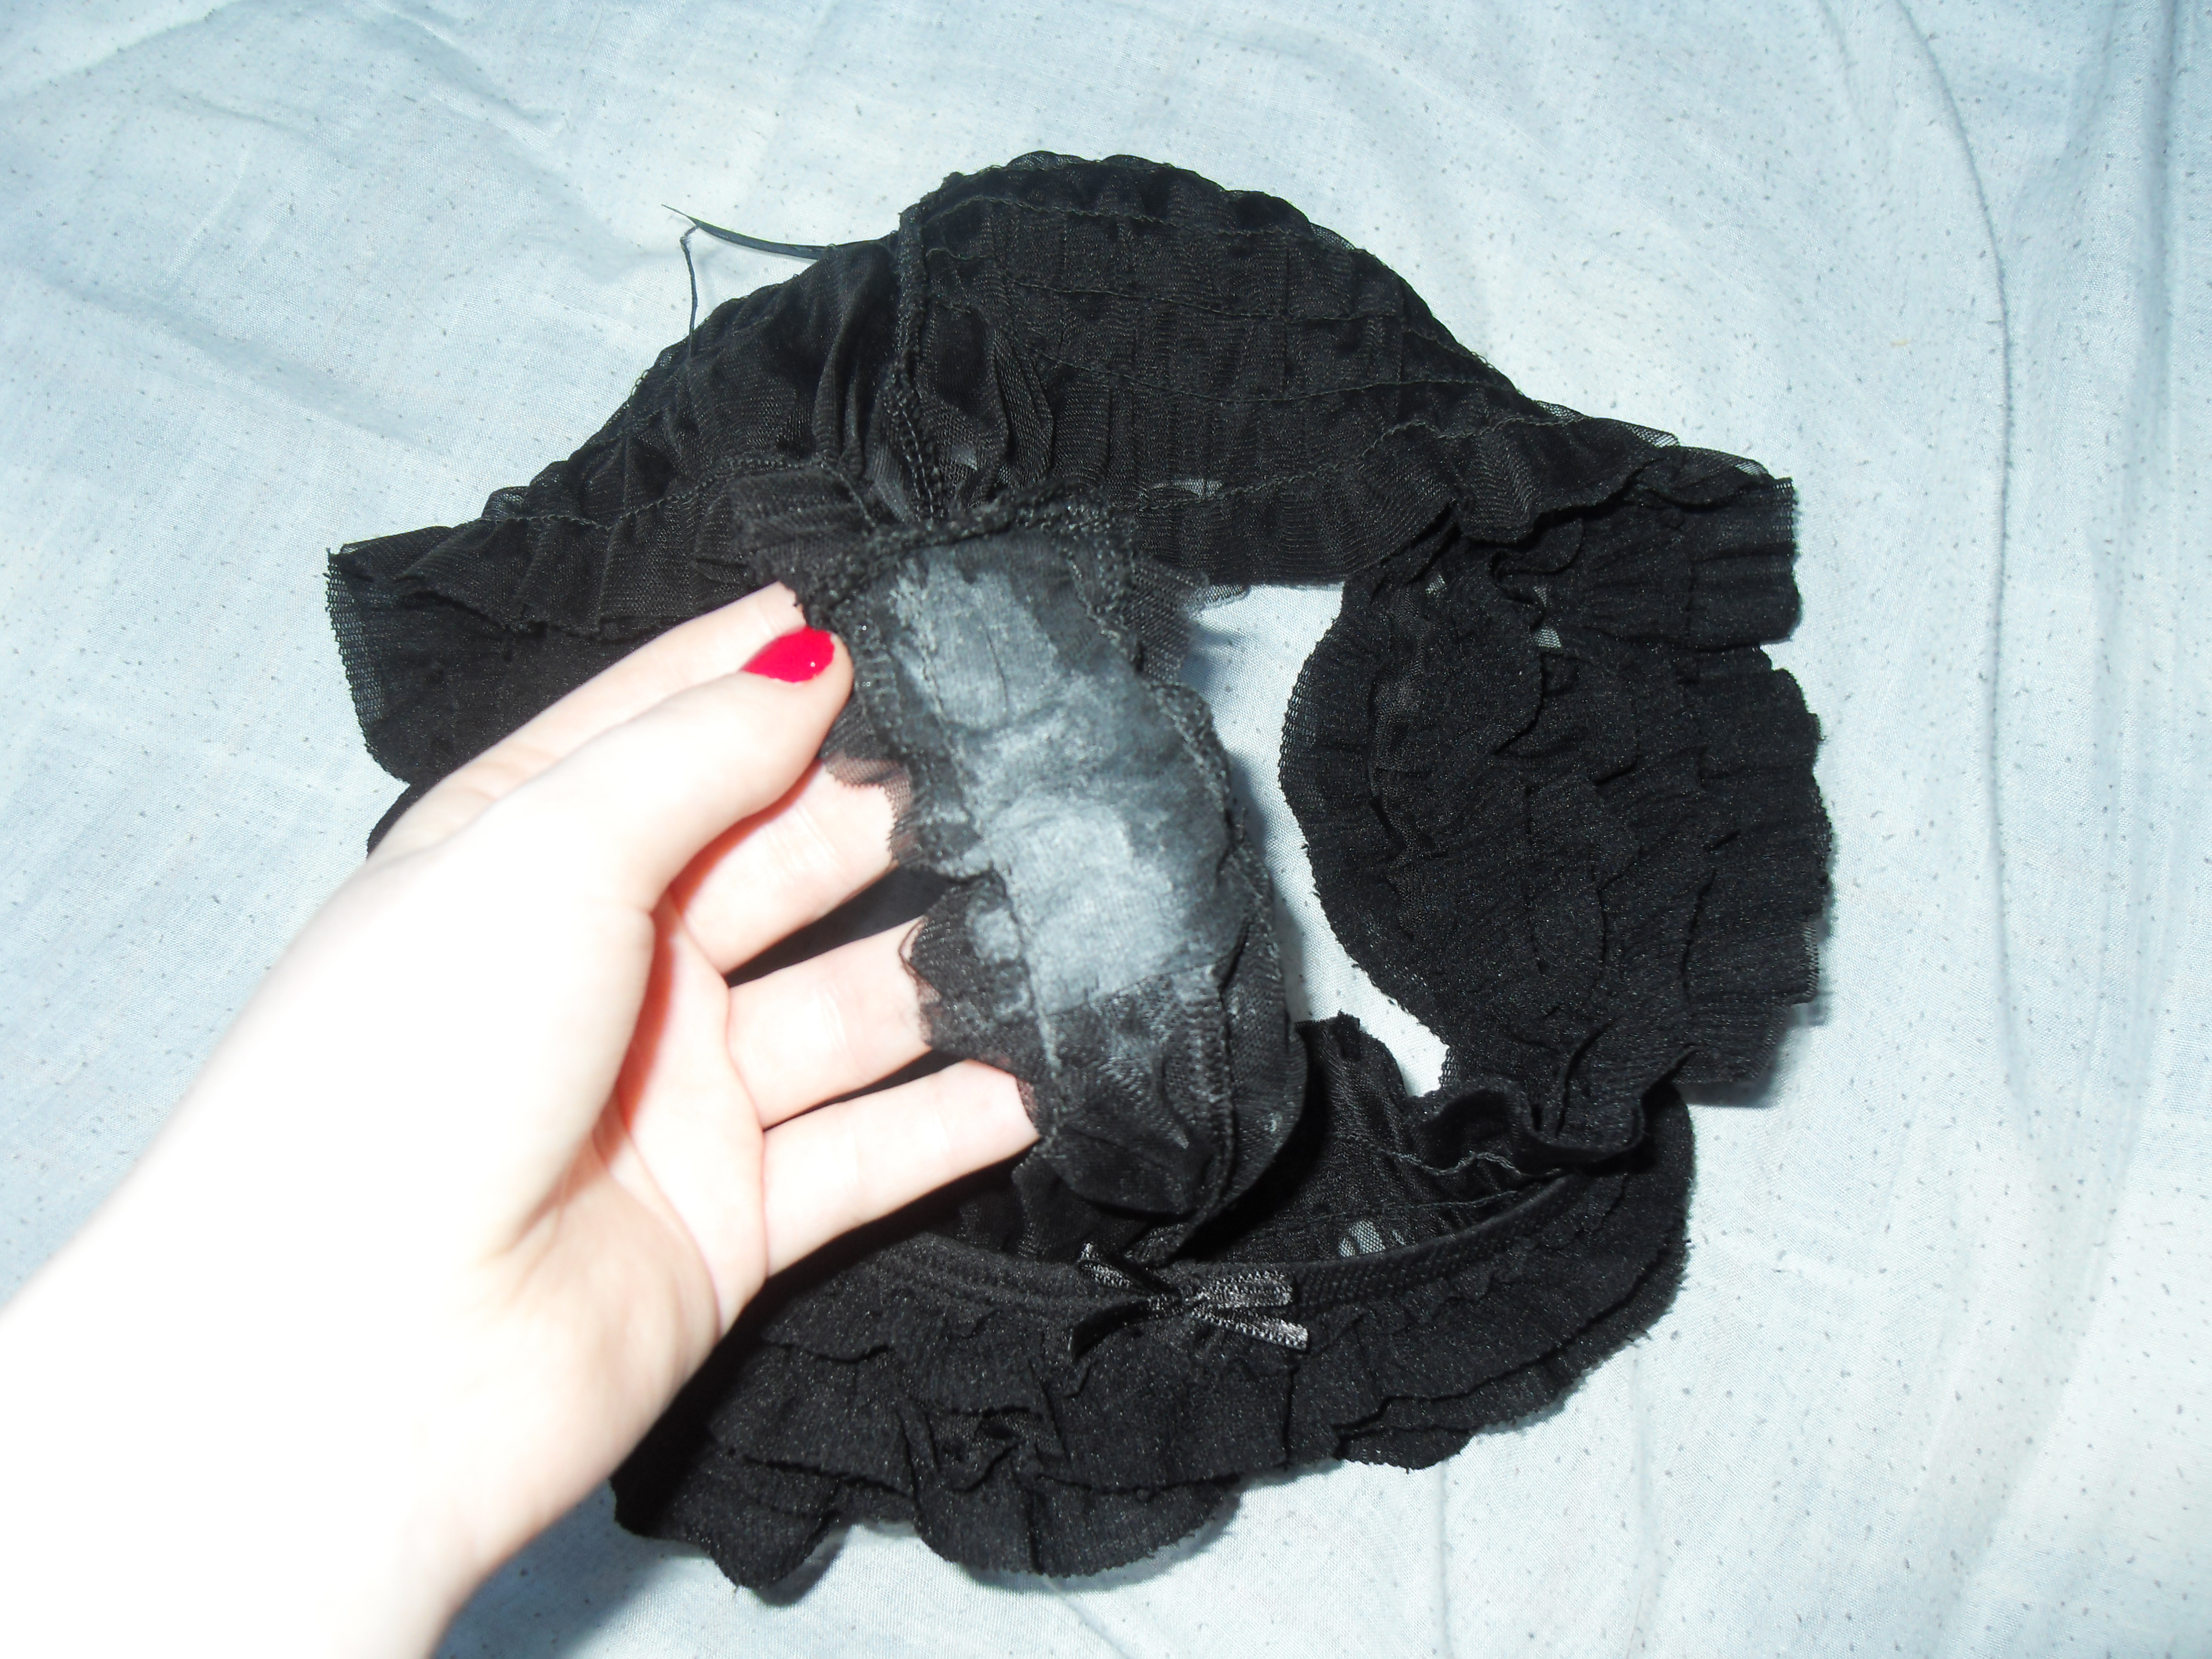 See just how dirty my panties can get! 